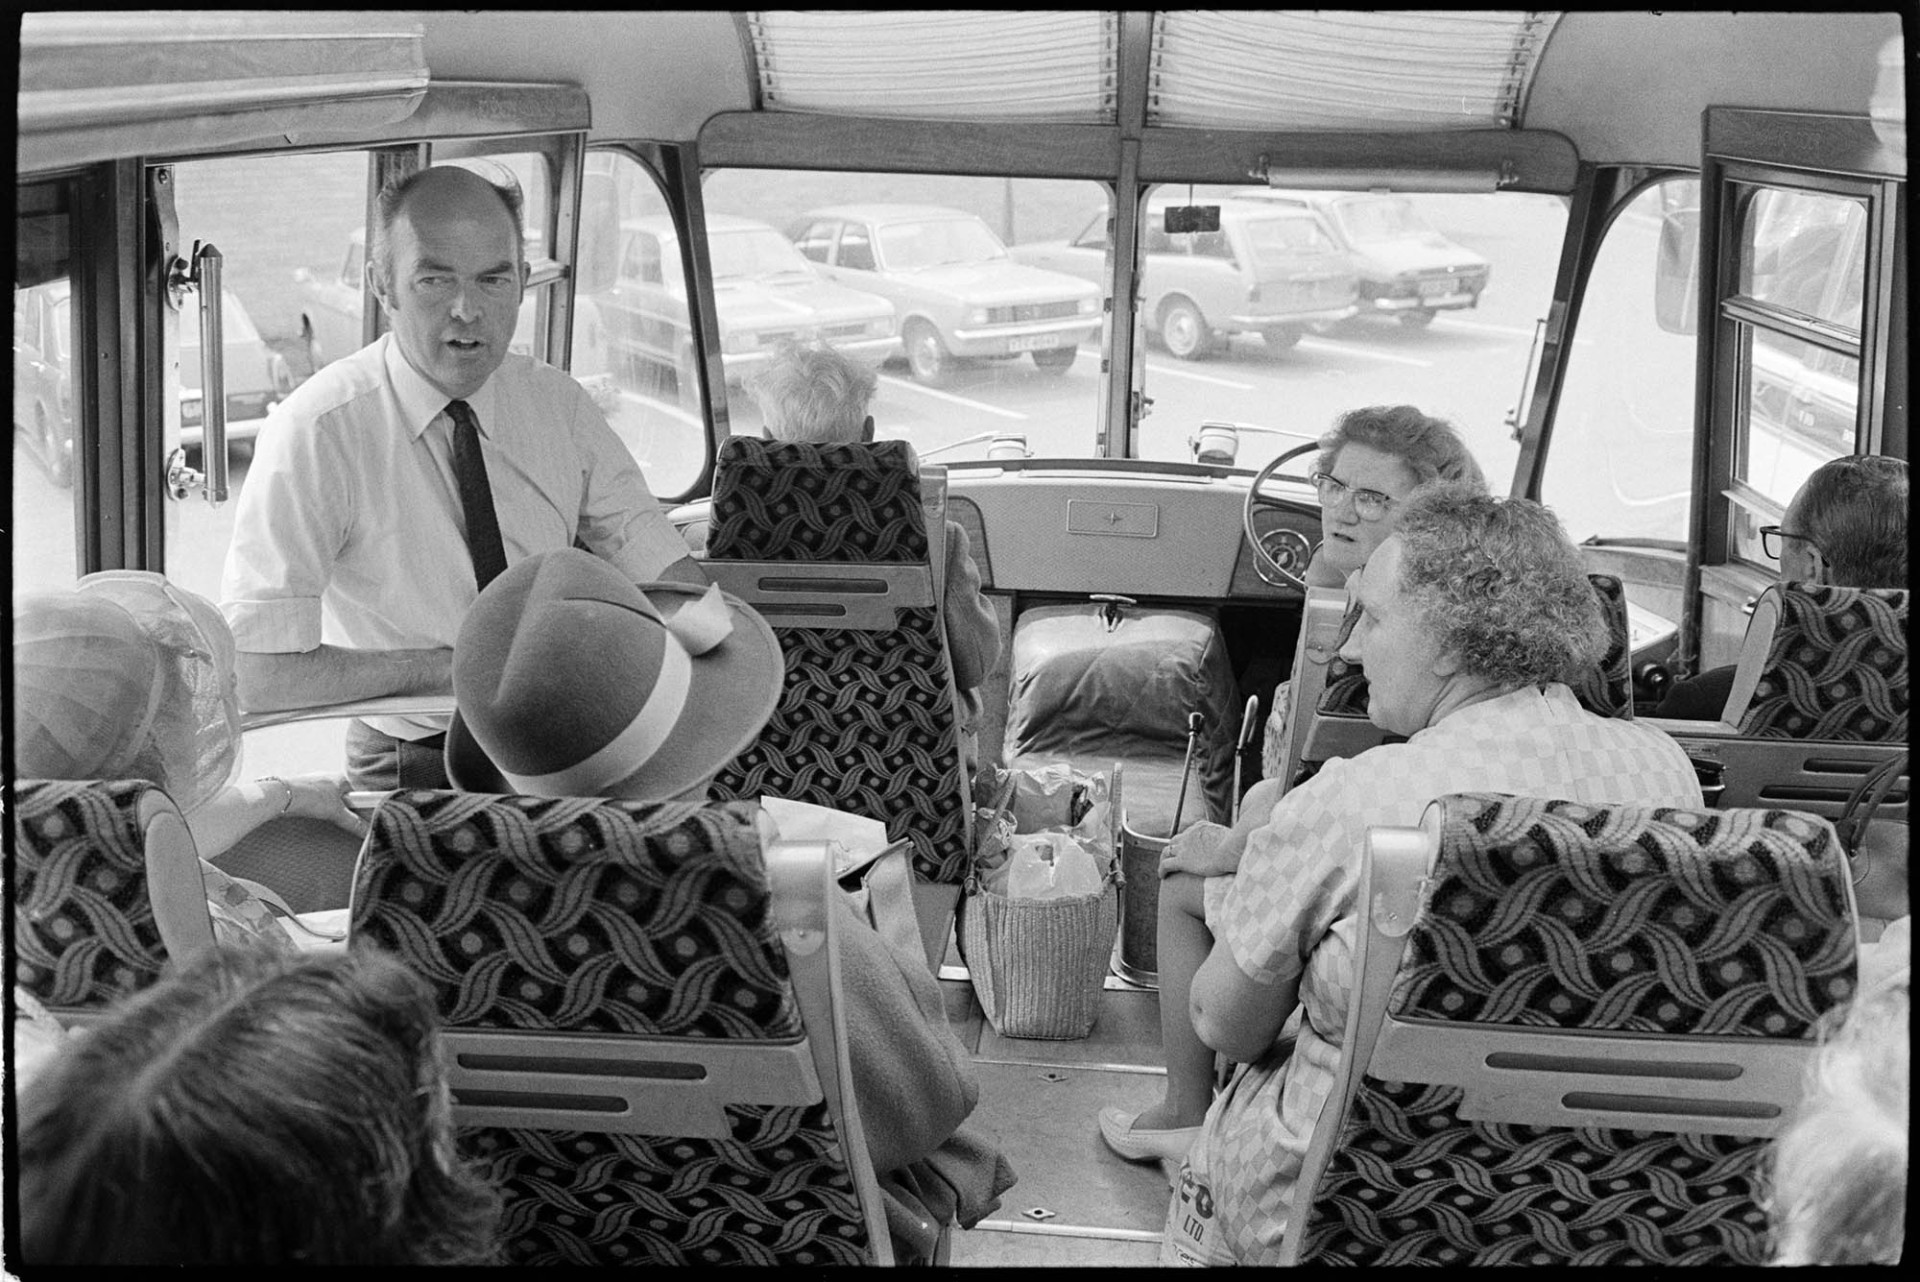 Passengers on Friday bus to Barnstaple. Driver John Beer from Chulmleigh.<br />
[Women sat at the front on the bus and talking to the driver. The woman on the extreme left wearing a hat is Mrs Turner, the proprietor of the bus company.]